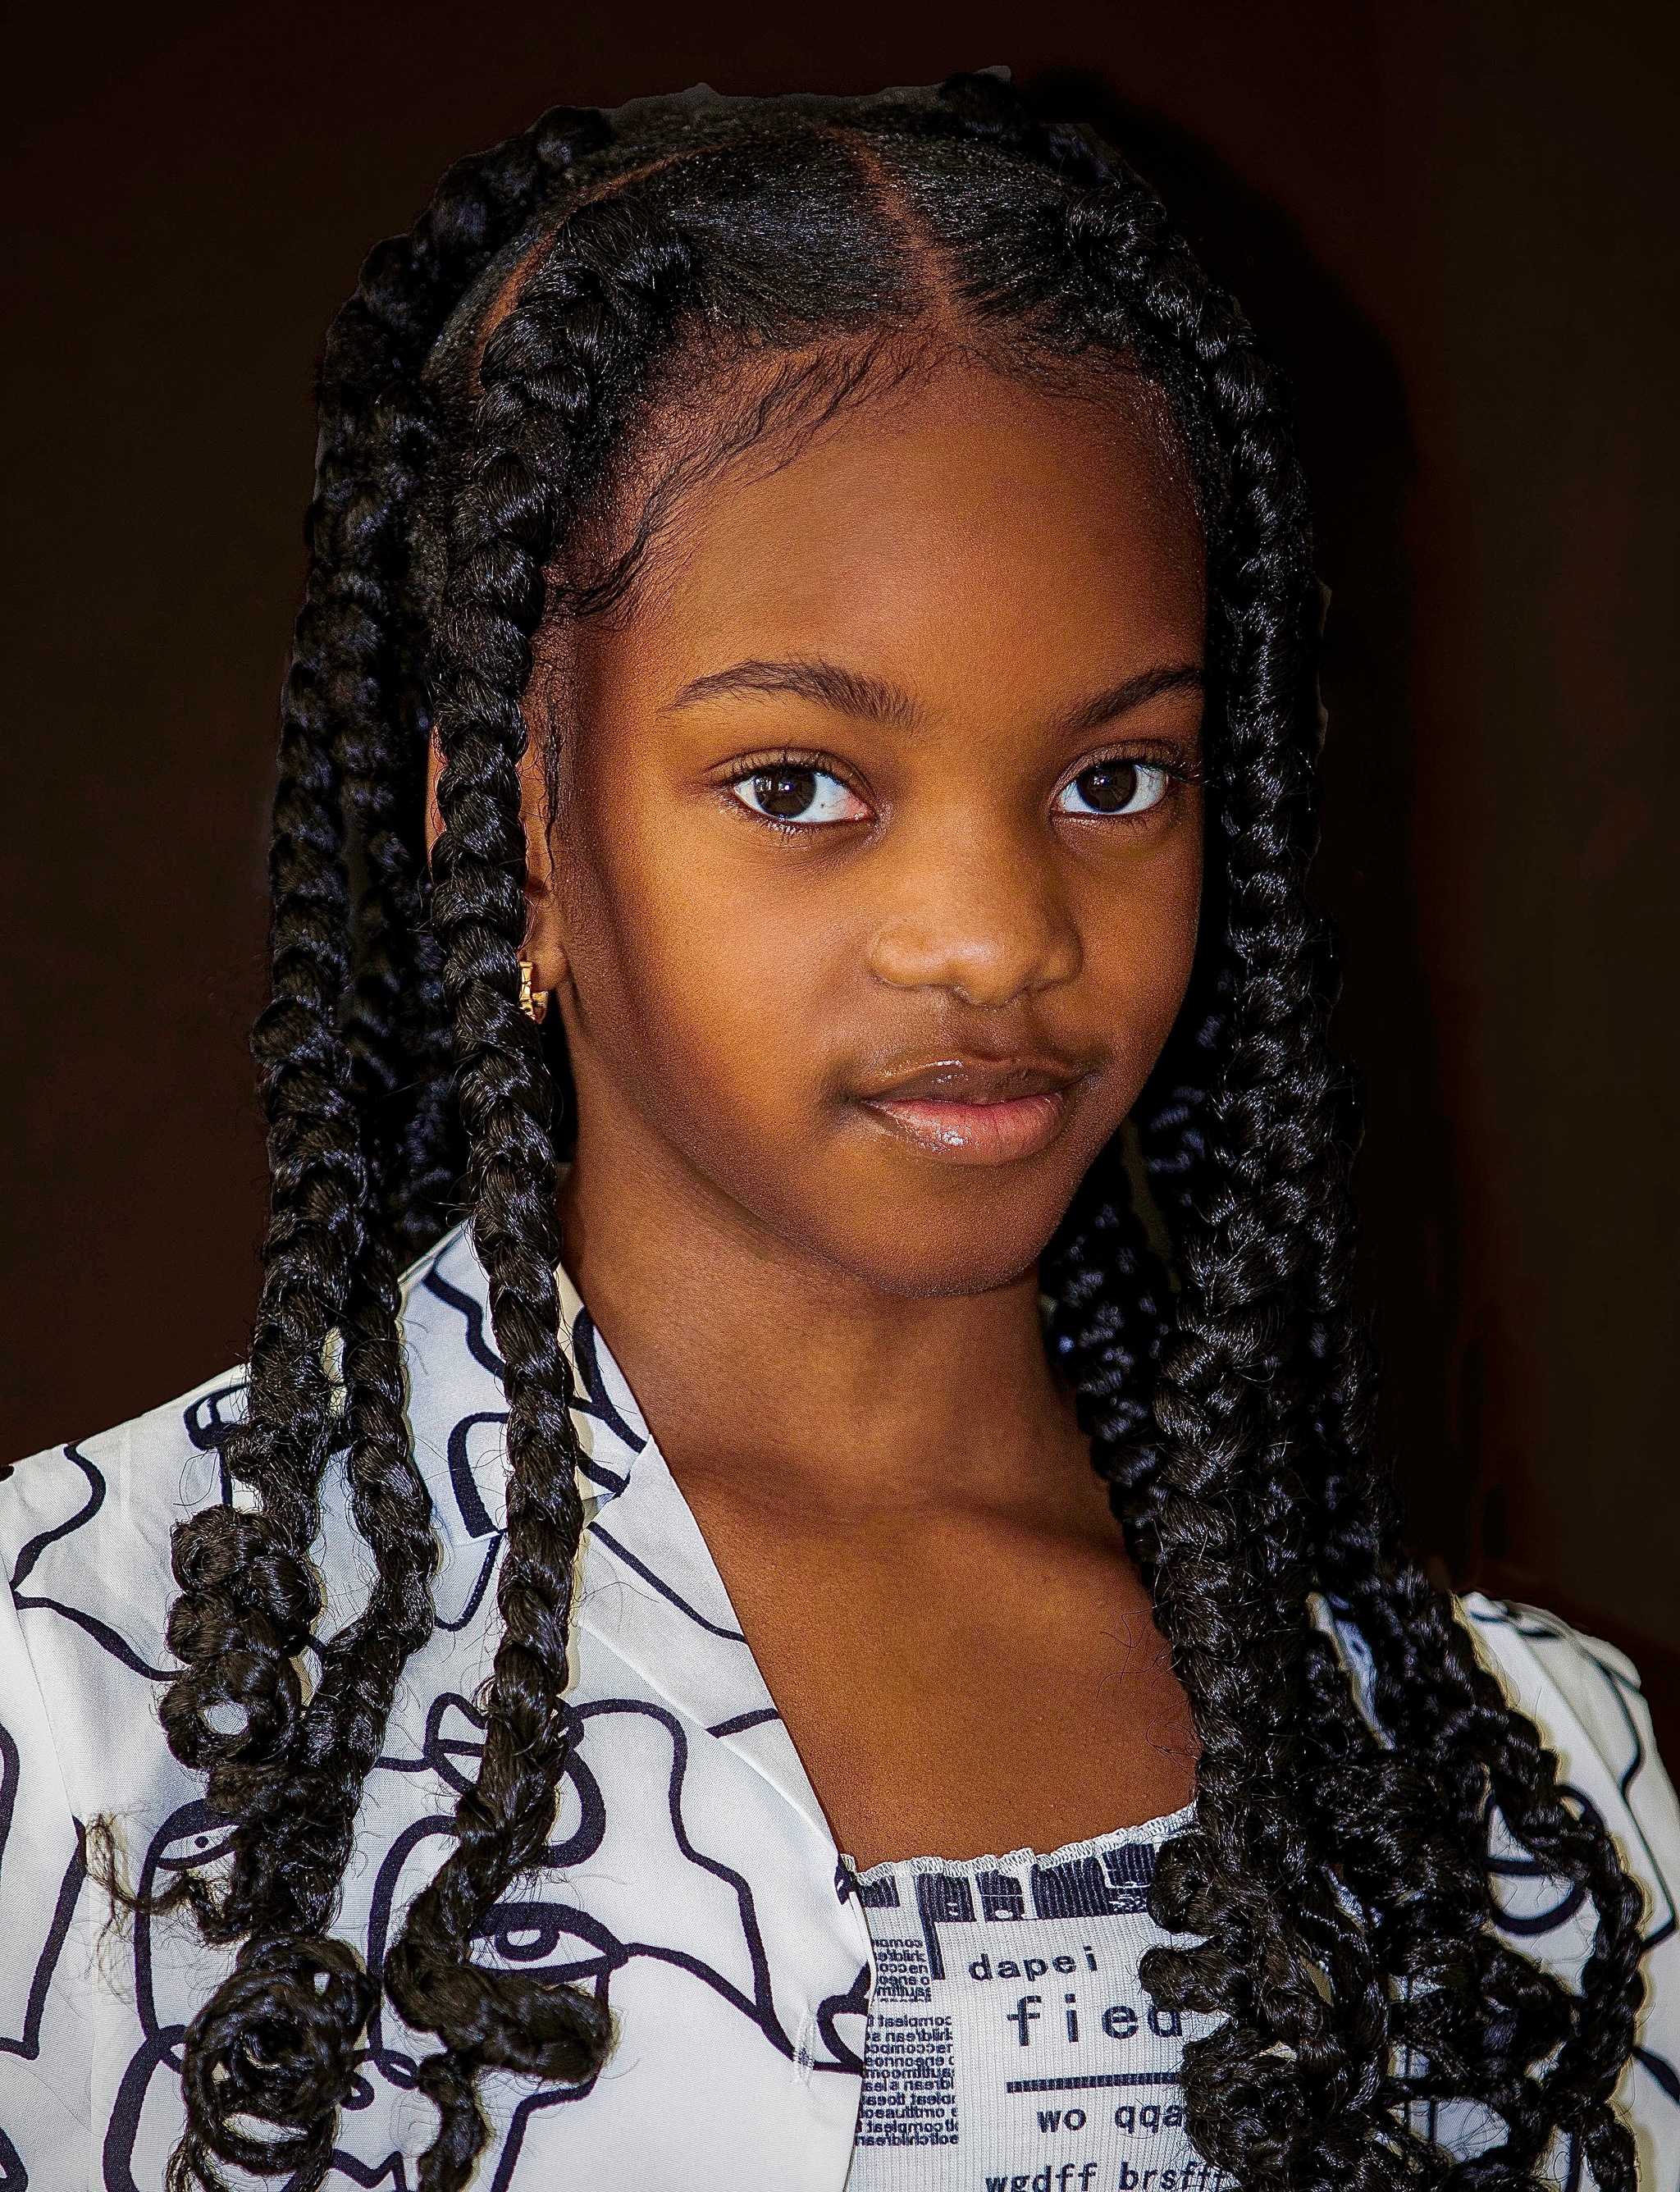 A headshot of child actor Ifeoluwa Adeniyi, young Black girl whose hair is parted down the middle with long locs falling down either side of her head past her shoulders. She wears a white shirt with a black graphic print.